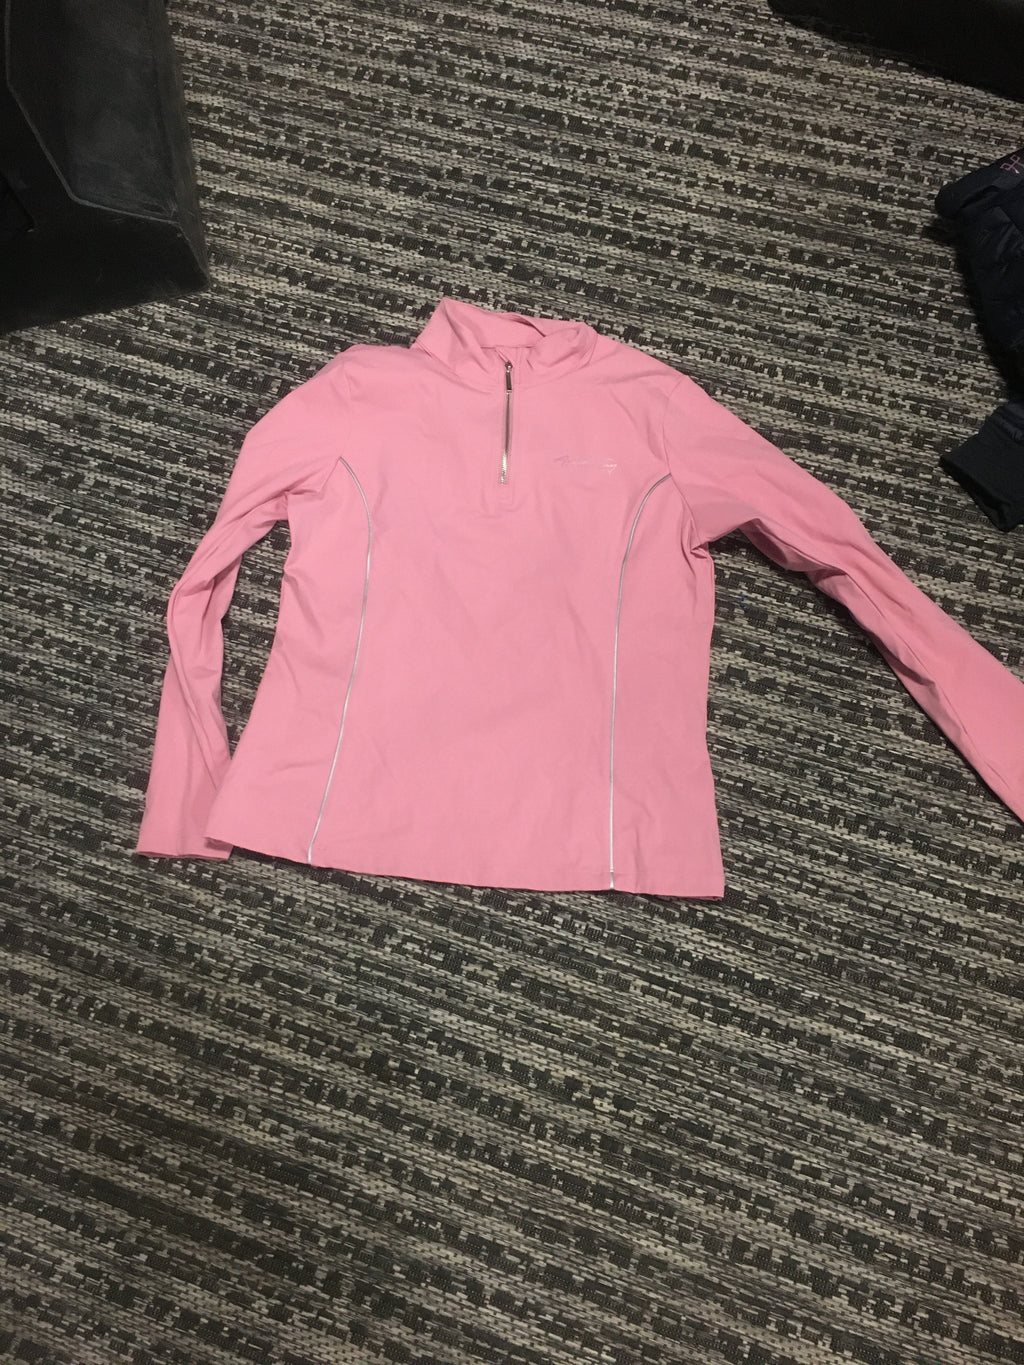 Annie Jay Long Sleeve (Pink L)